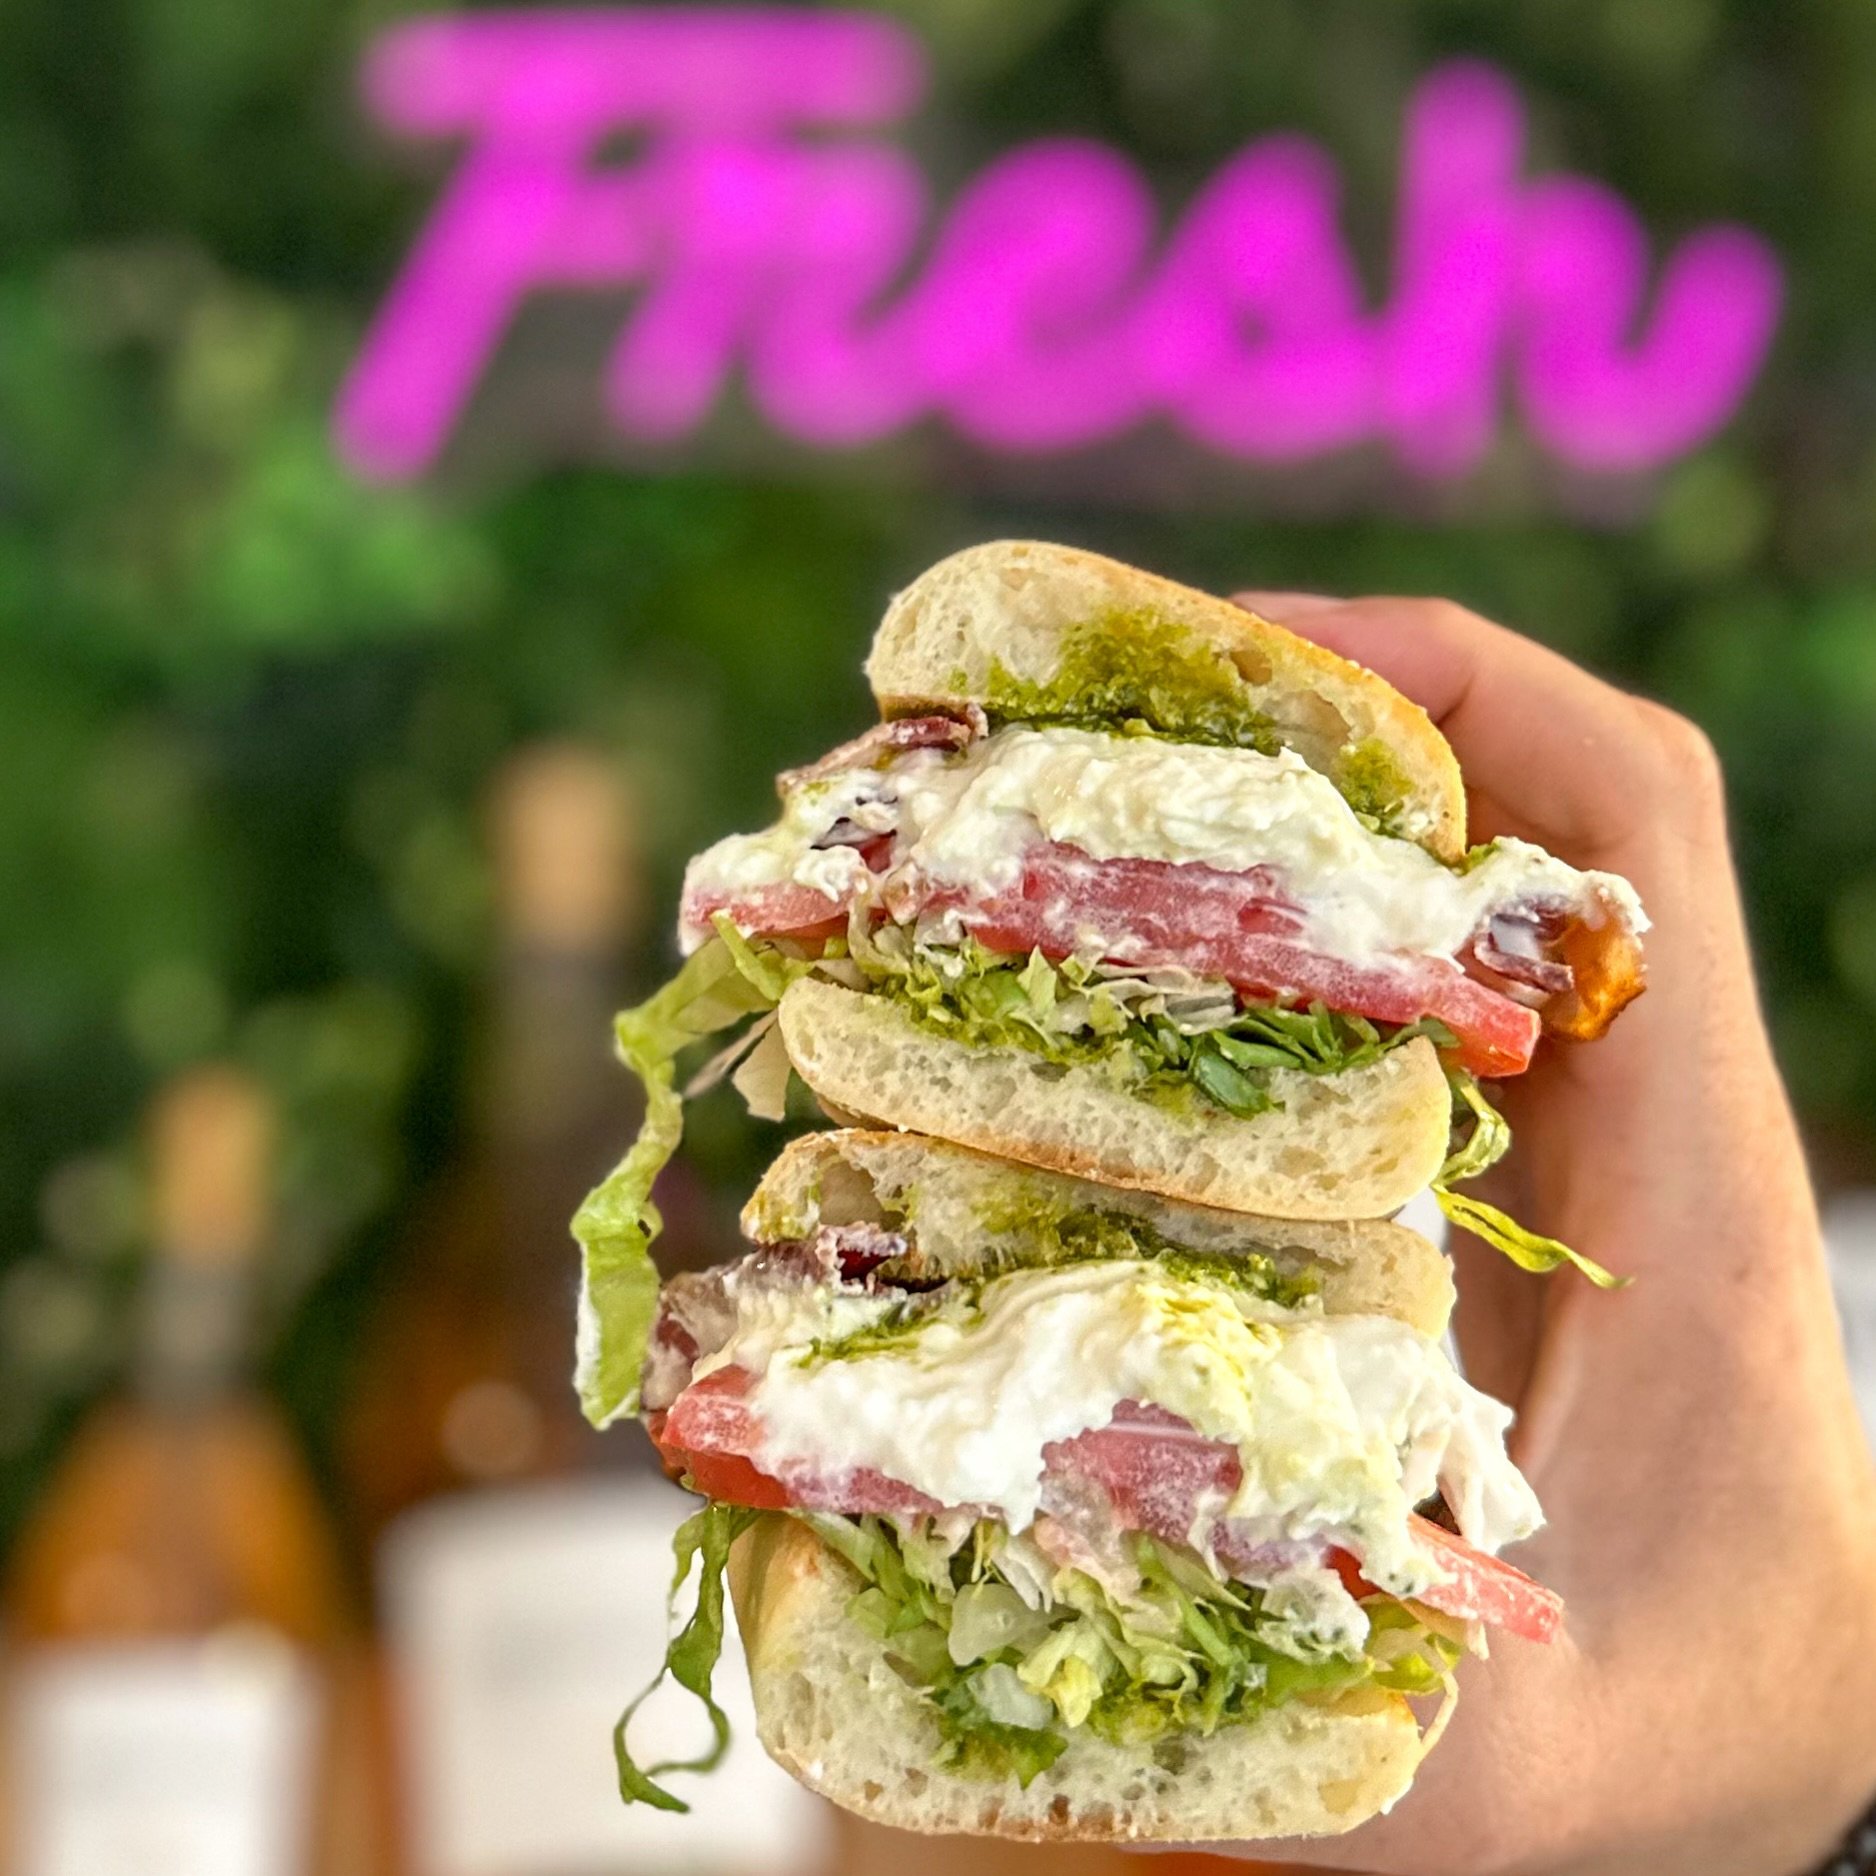 &ldquo;Damn pookie you be looking absolutely fire&rdquo; 🔥 Introducing the 𝗣𝗘𝗦𝗧𝗢 𝗣𝗢𝗢𝗞𝗜𝗘 &hellip; burrata, pesto, bacon, lettuce, tomato, EVOO on ciabatta.